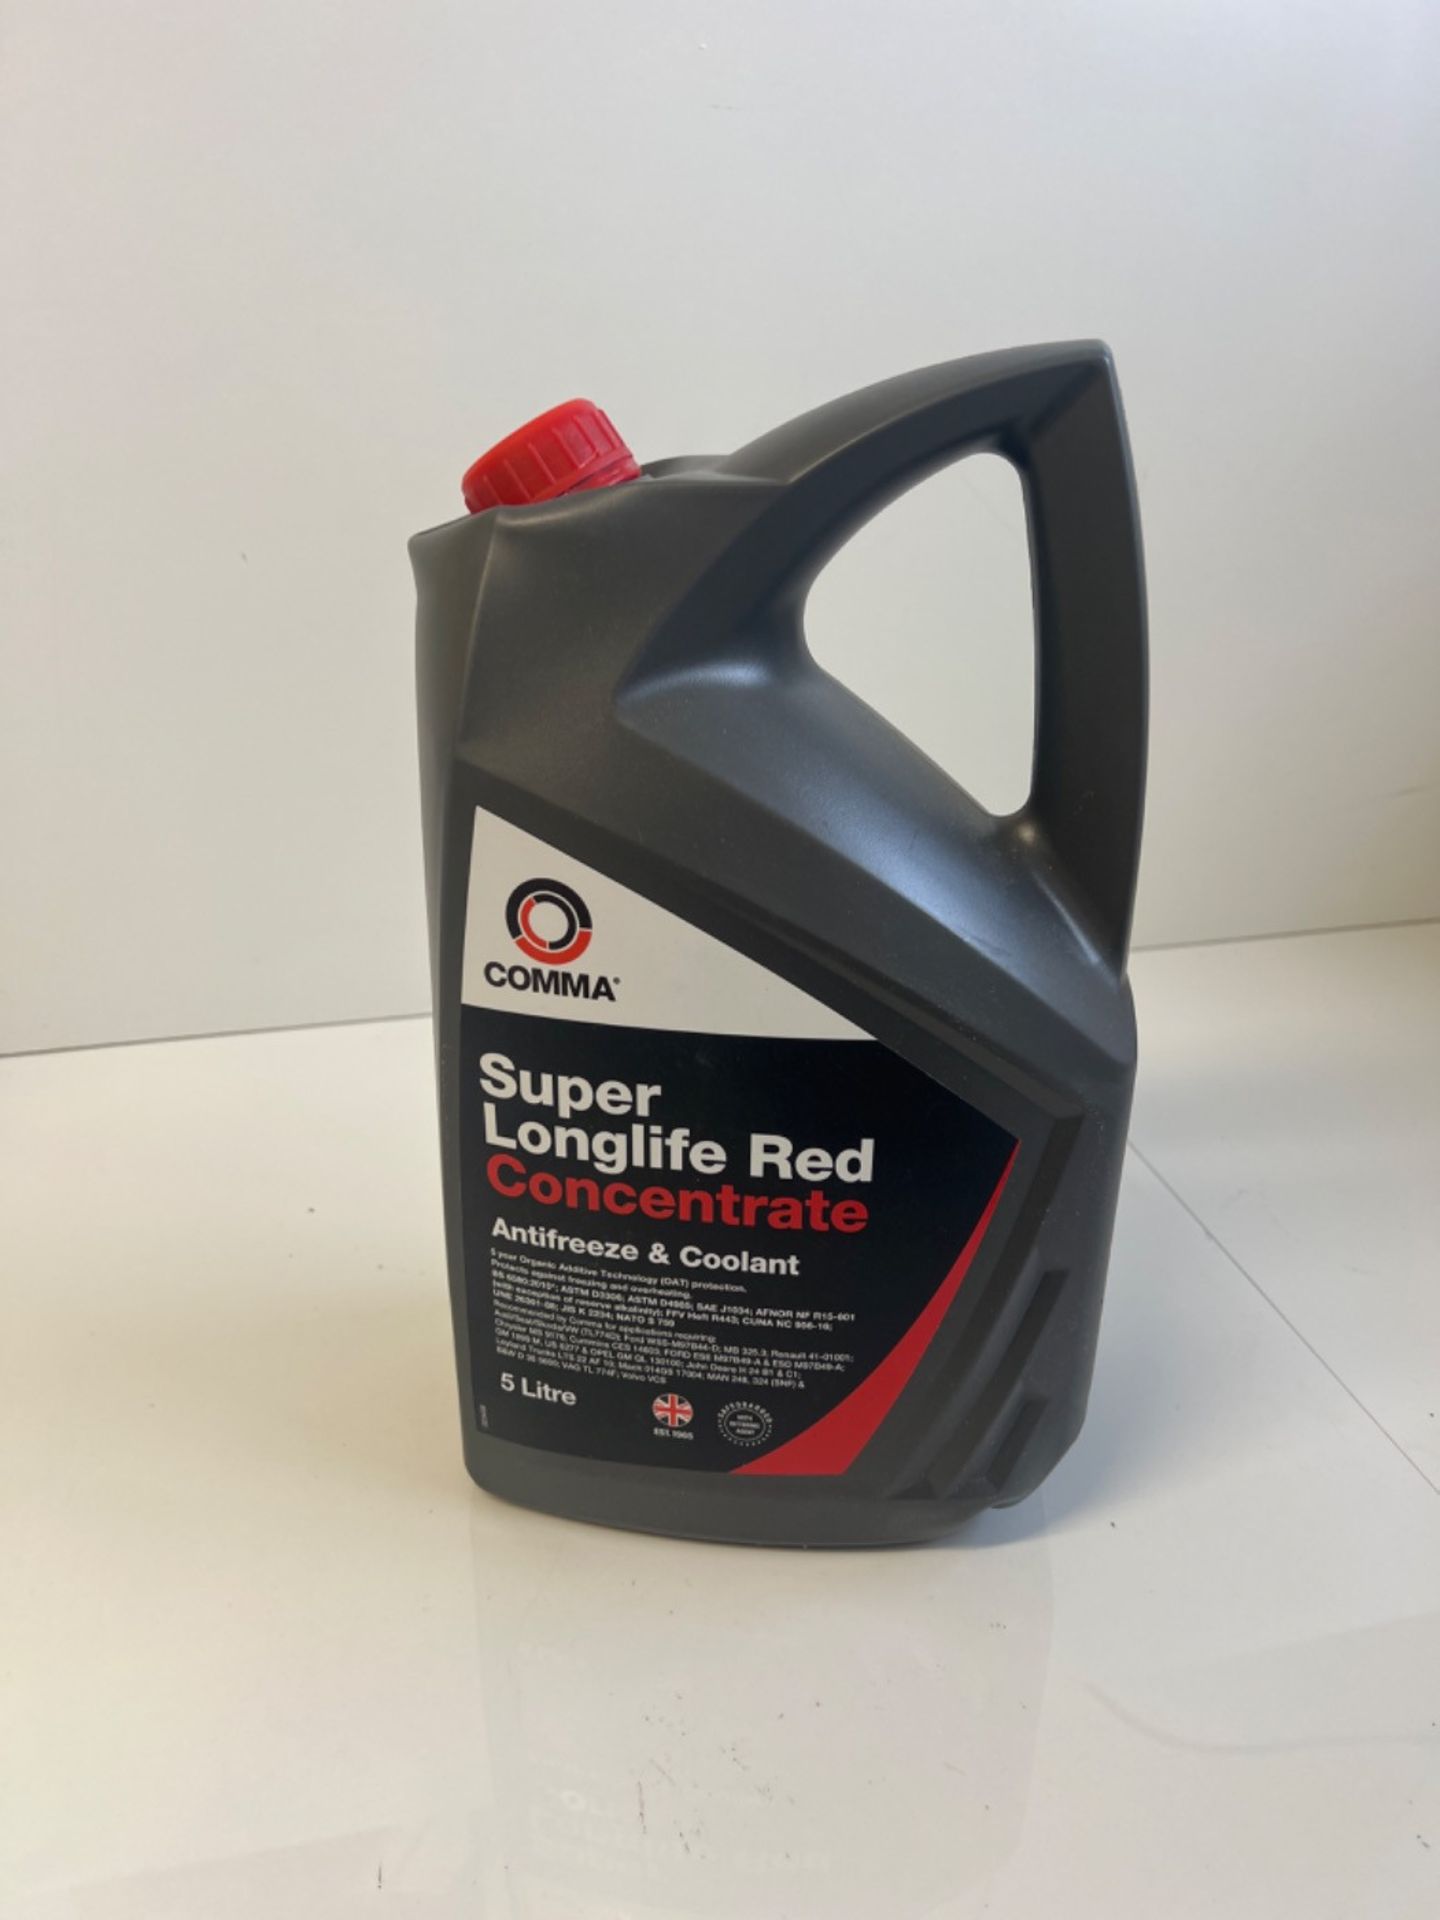 Comma SLA5L Super Red Antifreeze and Coolant Concentrated, 5 Litre - Image 2 of 2